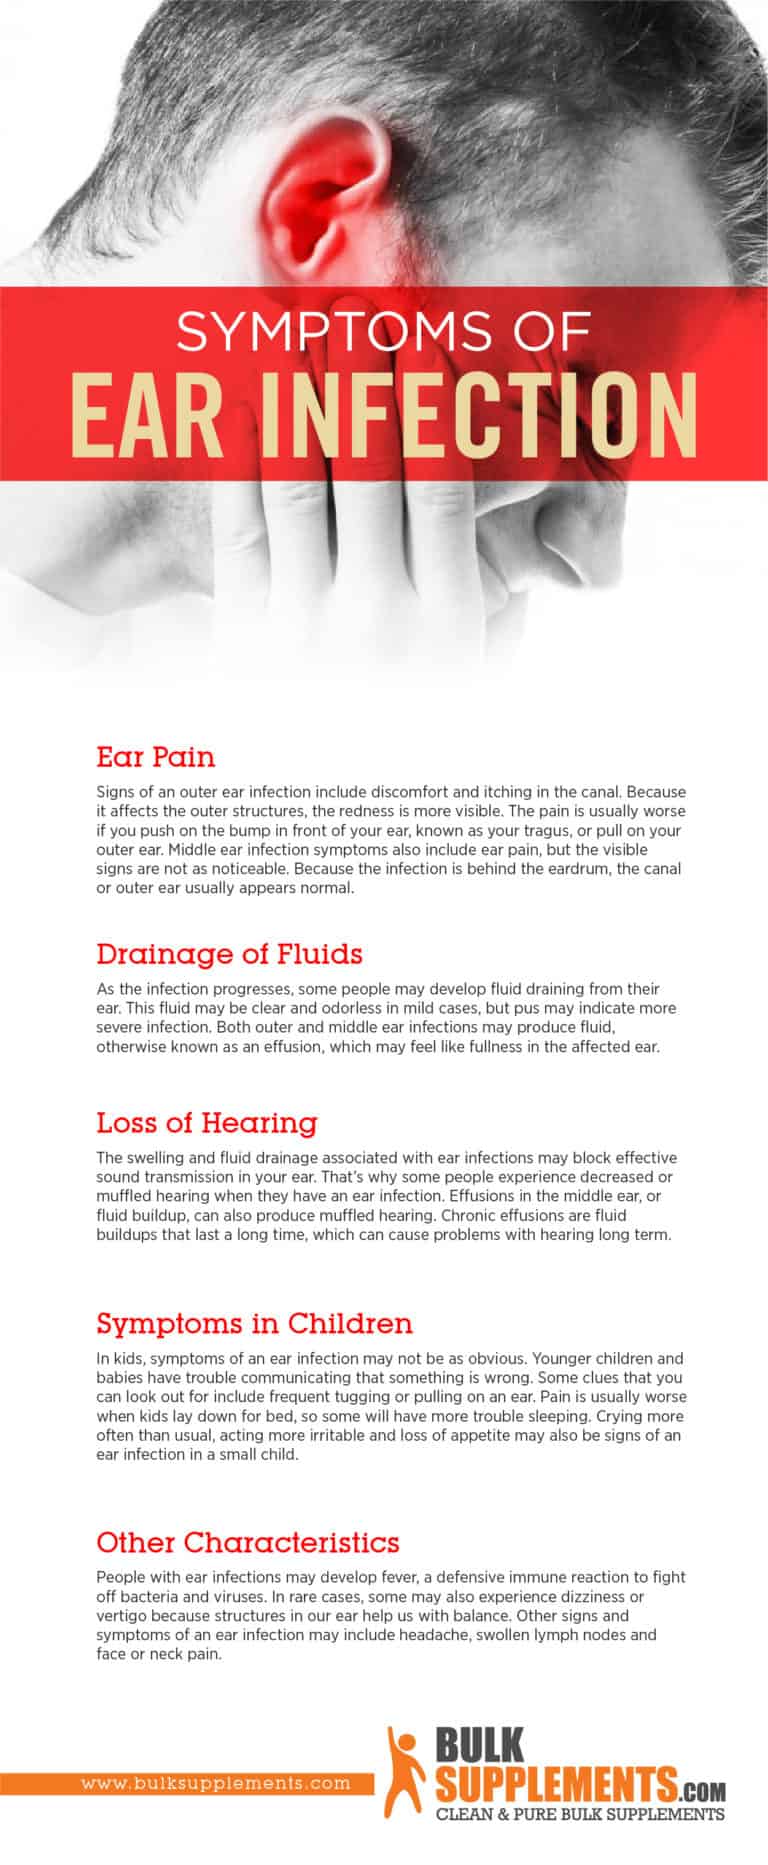 Ear Infections Causes Symptoms Treatment Diagnosis And Prevention Images 